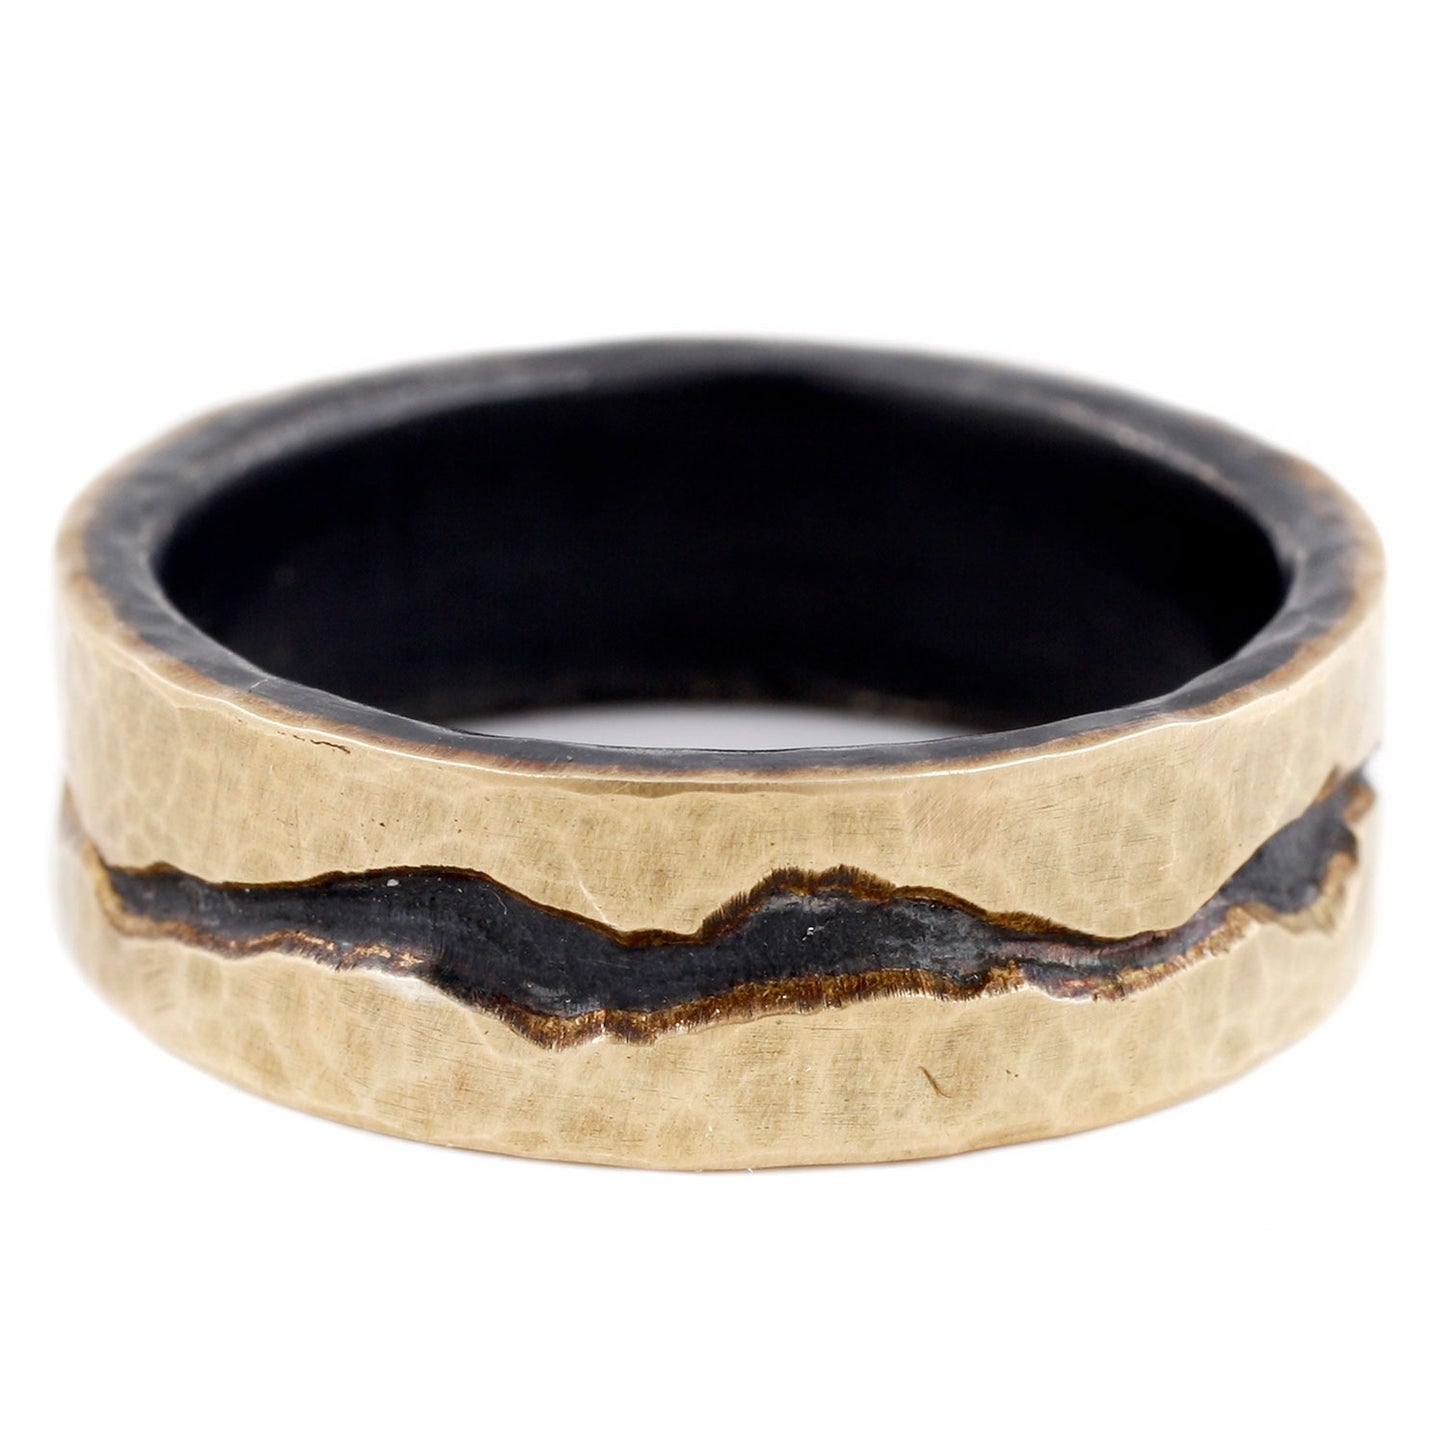 TAP by Todd Pownell Gold and Silver Band Ring